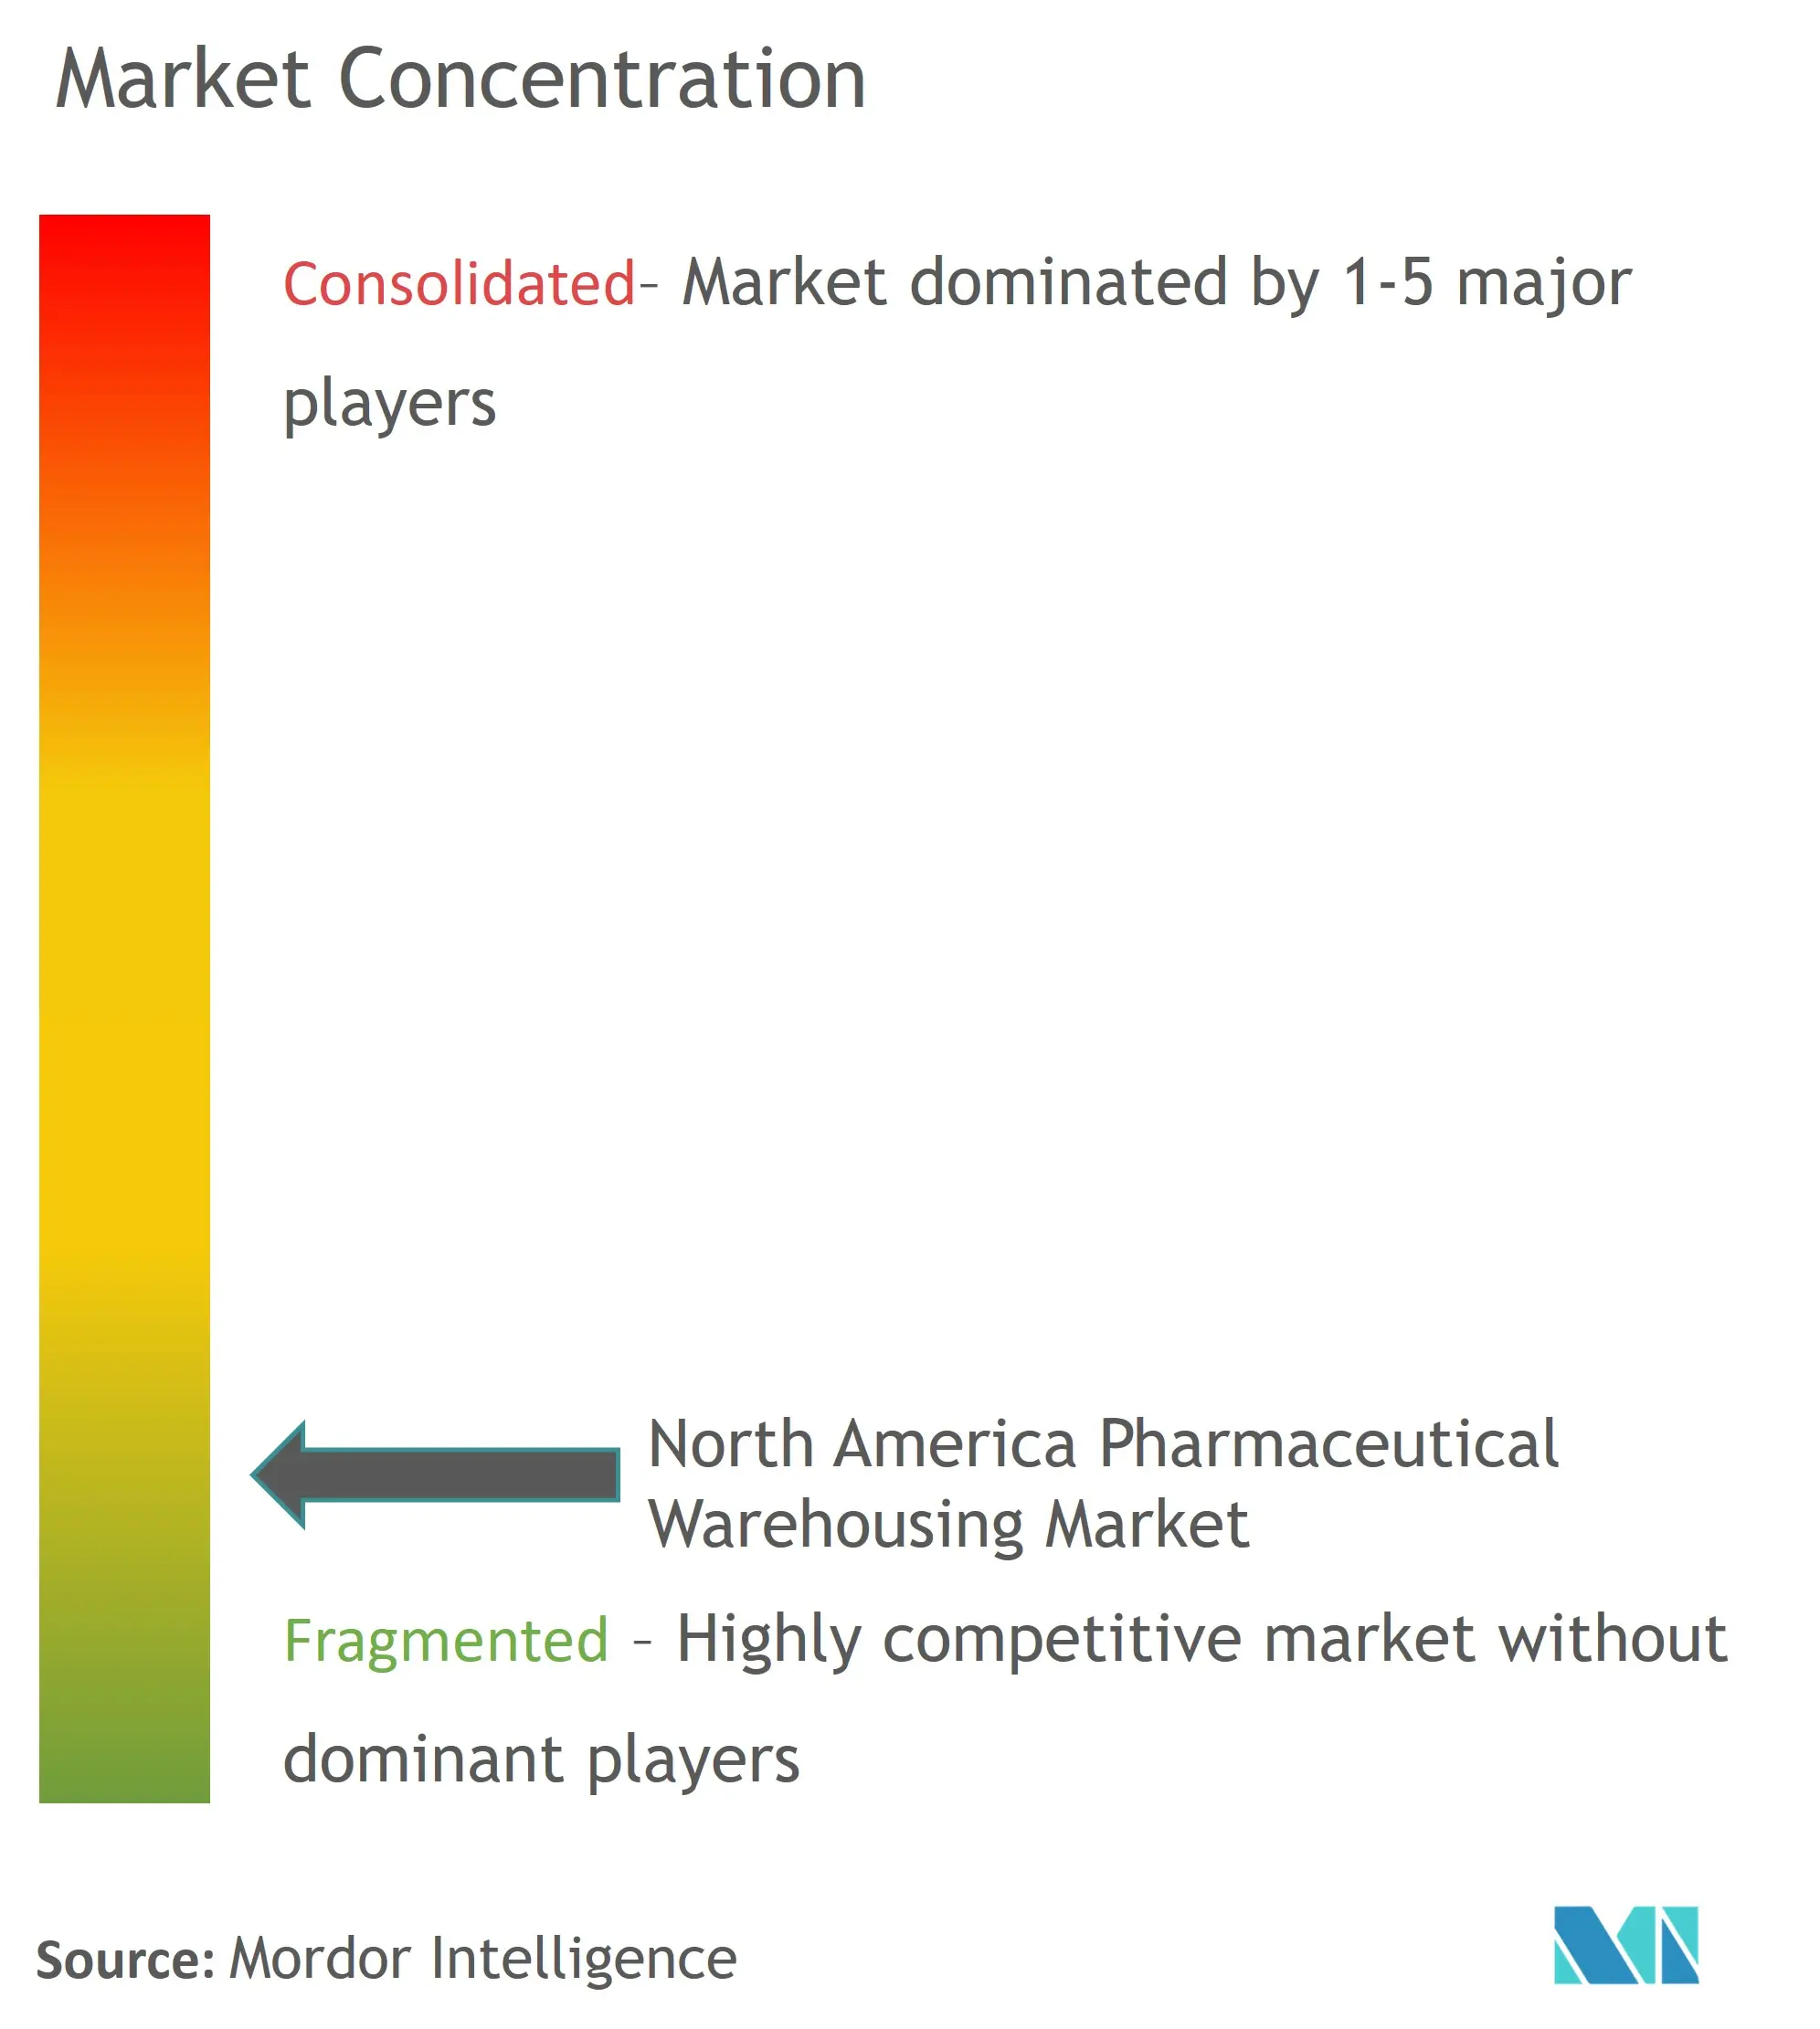 North America Pharmaceutical Warehousing Market Concentration